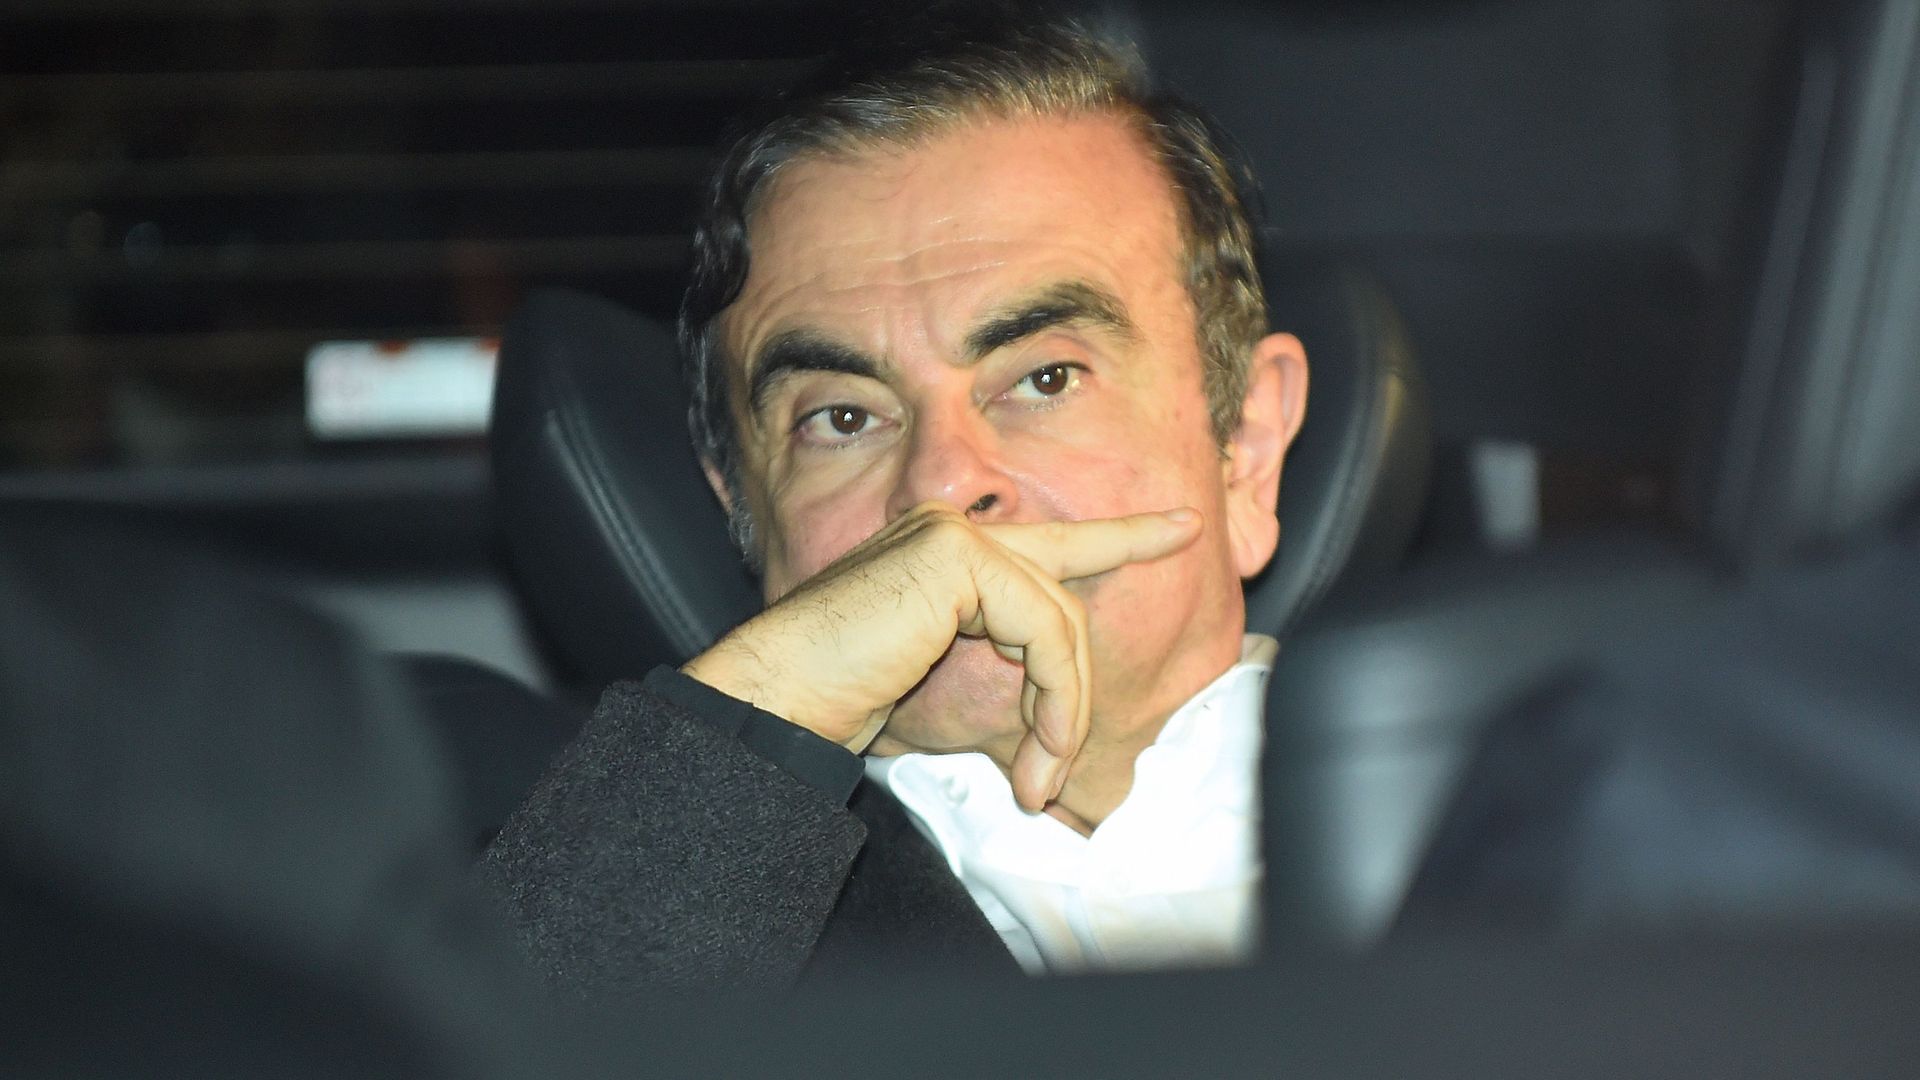 Image of former Nissan and Renault CEO Carlos Ghosn